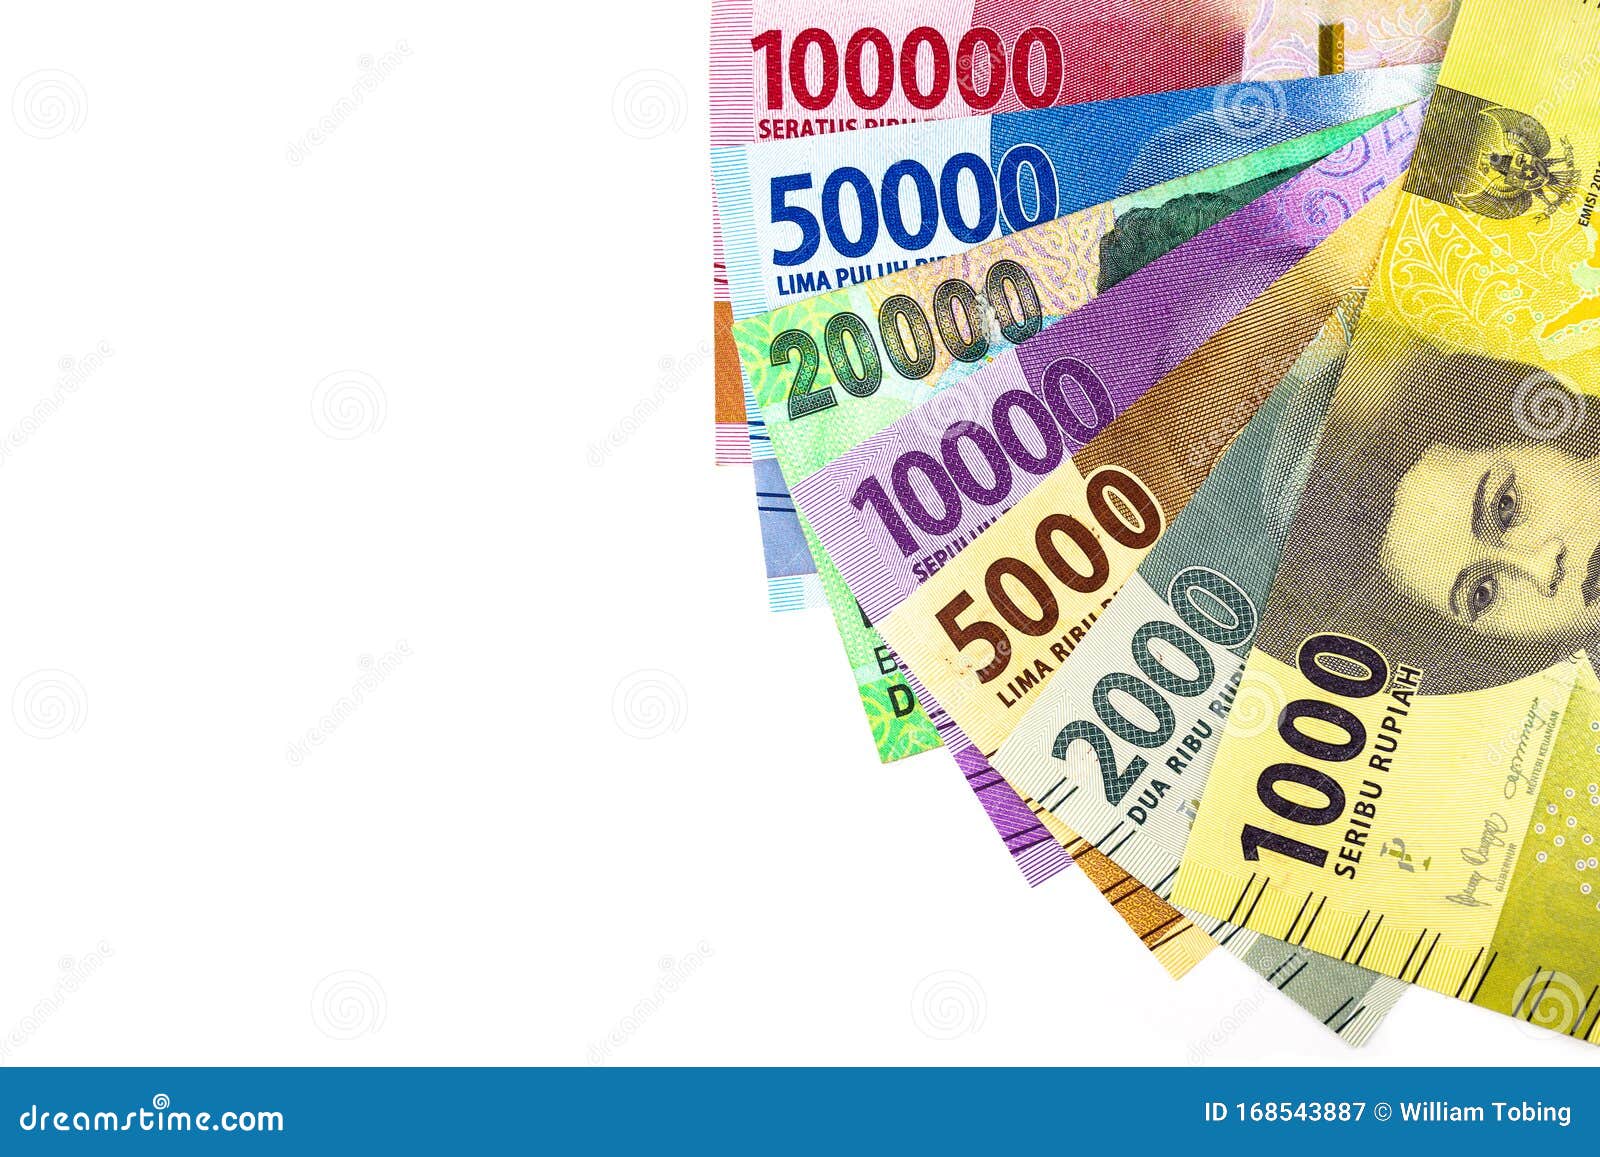 indonesia currency rupiah money paper all nominal. financial and economies  on white background